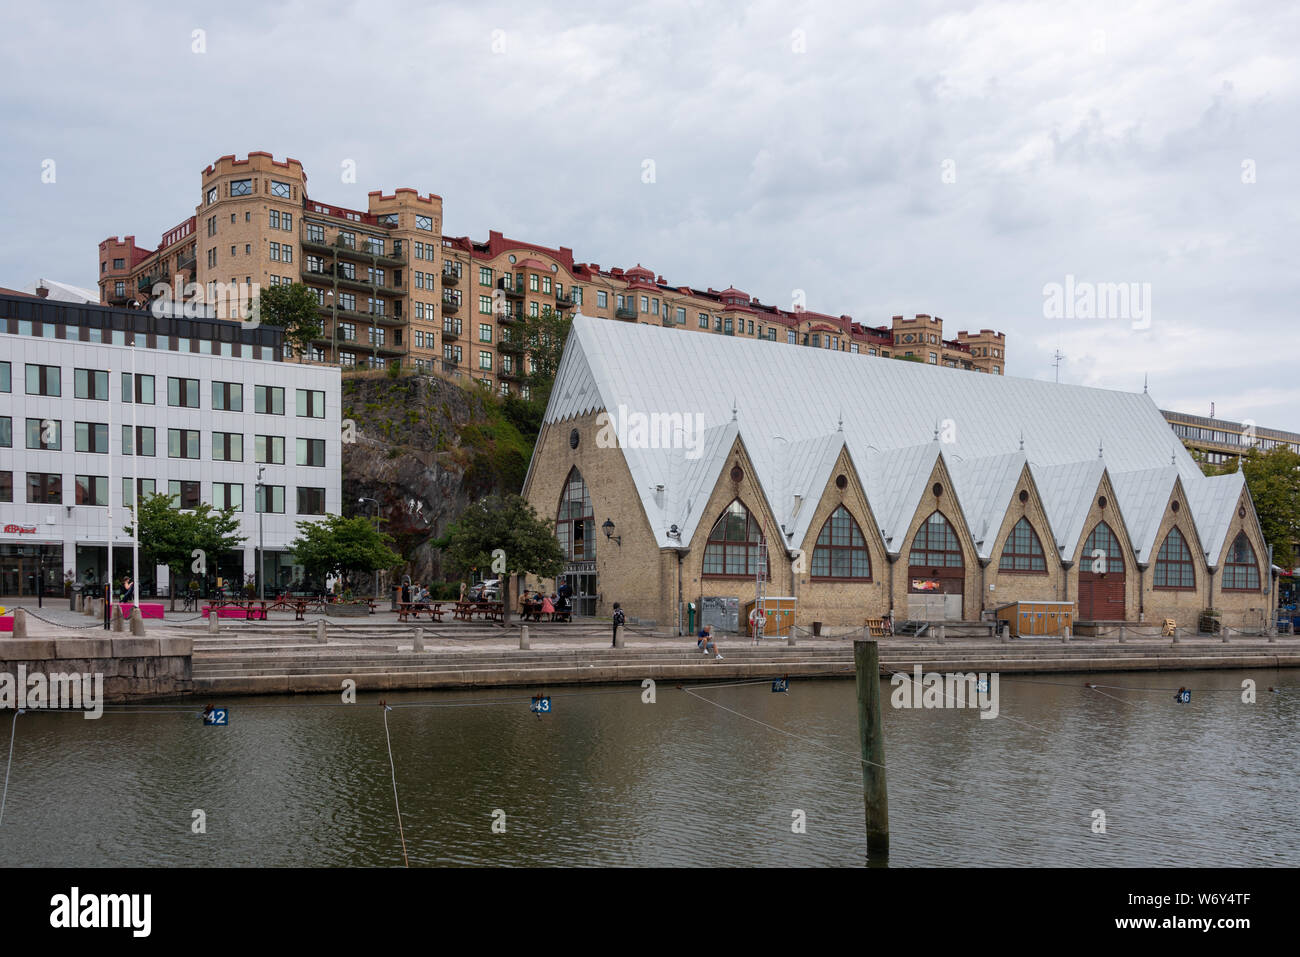 Gothenburg, Sweden - July 19, 2019: View of the Ffishermen's church in Gothenburg. Feskekôrka, as it is called in Swedish, is an indoor fish market wh Stock Photo